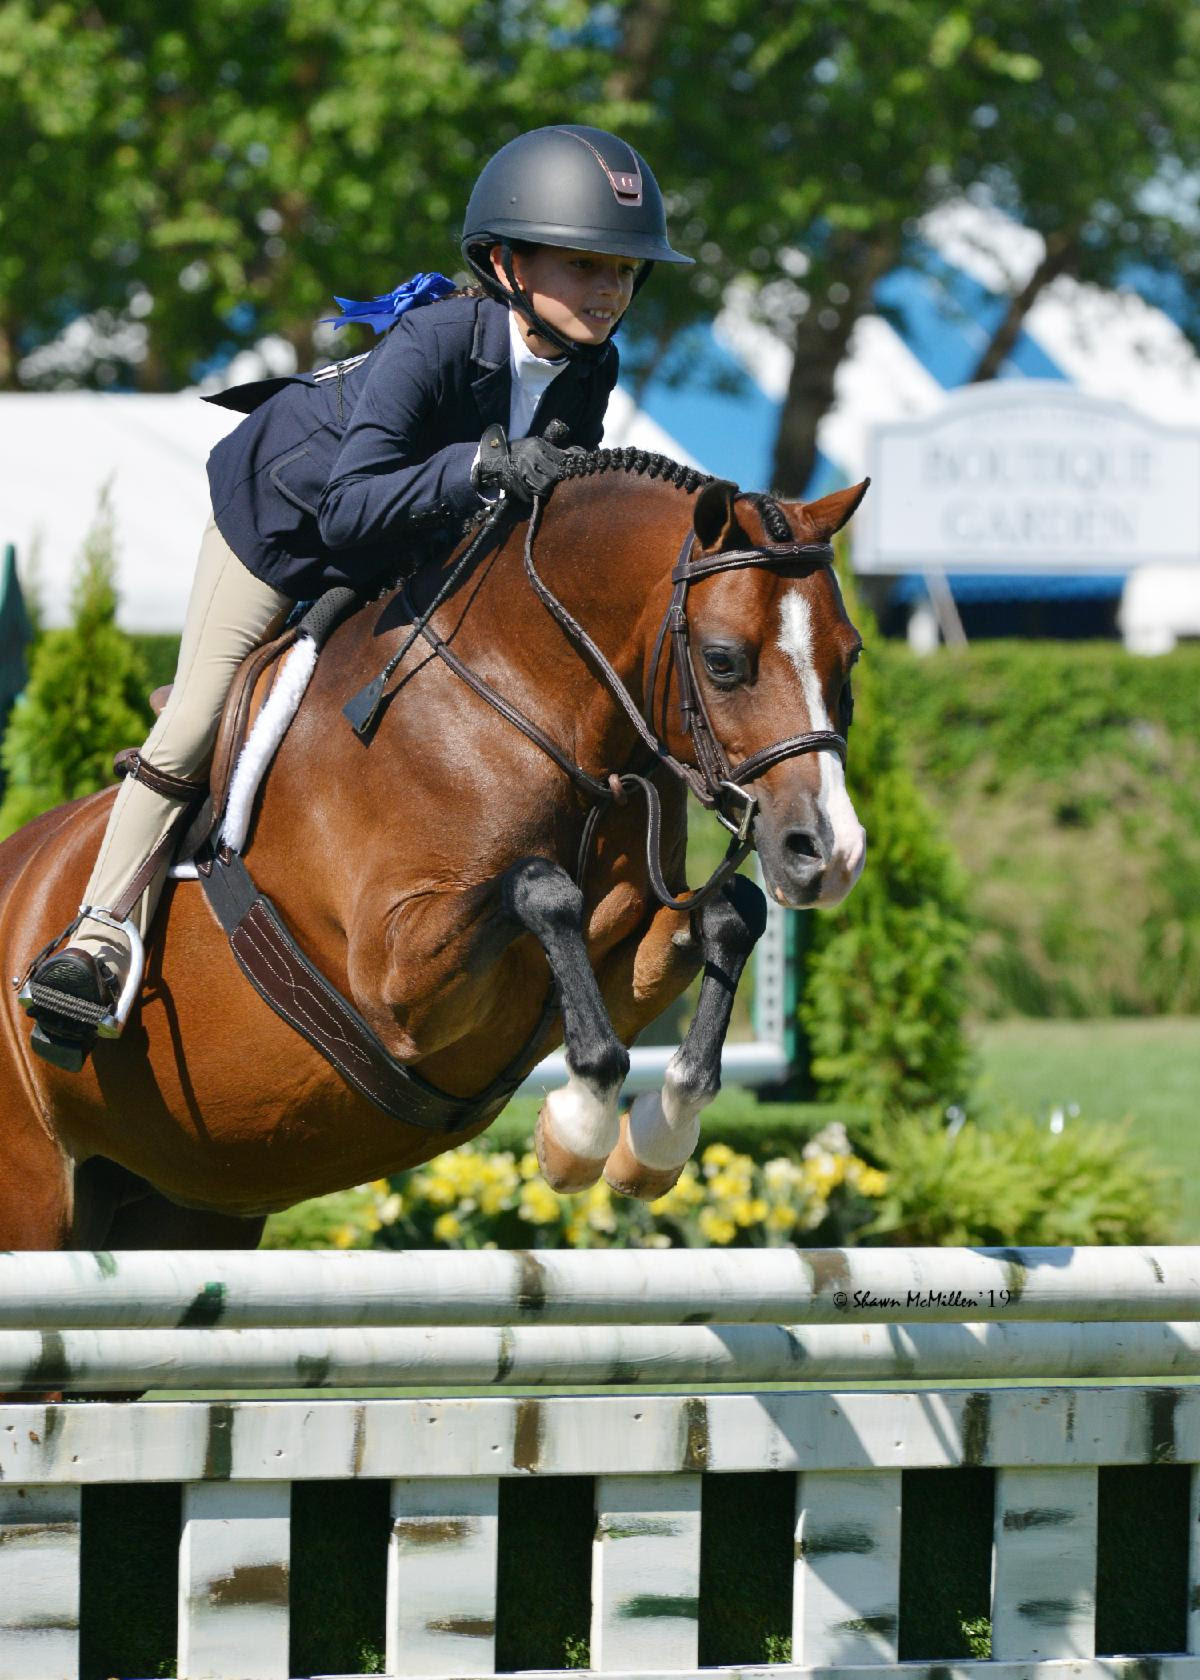 Scott Stewart and Everwonder were Grand Hunter Champions and Stewart was named Leading Hunter Rider, receiving the Charlie Weaver Memorial Trophy at the 2019 Hampton Classic Horse Show